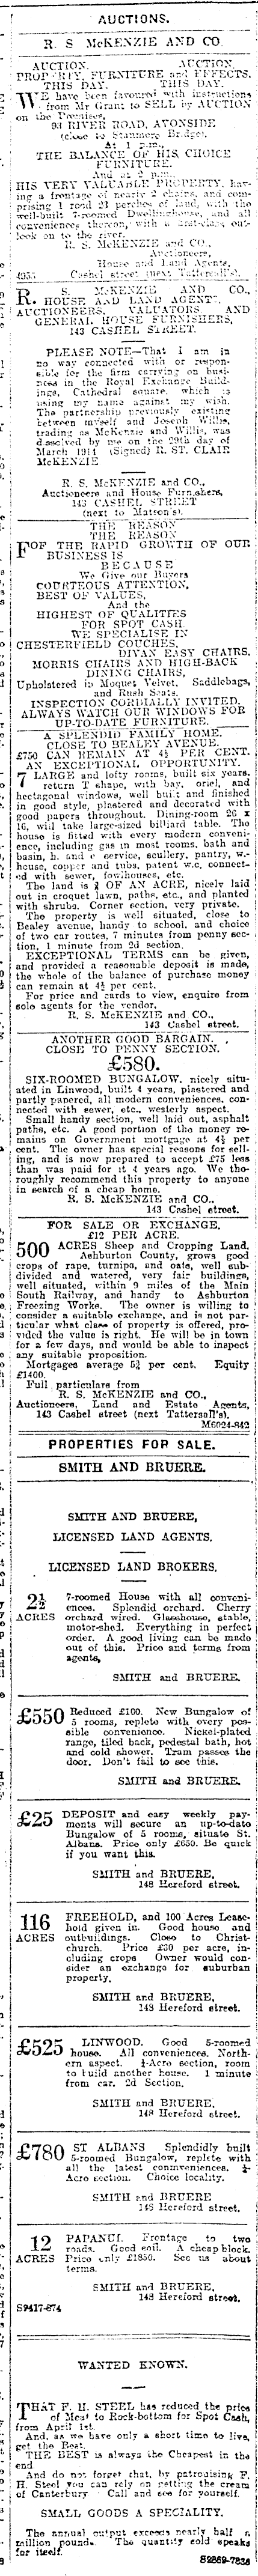 Papers Past Newspapers Press 21 June 1915 Page 12 Advertisements Column 6